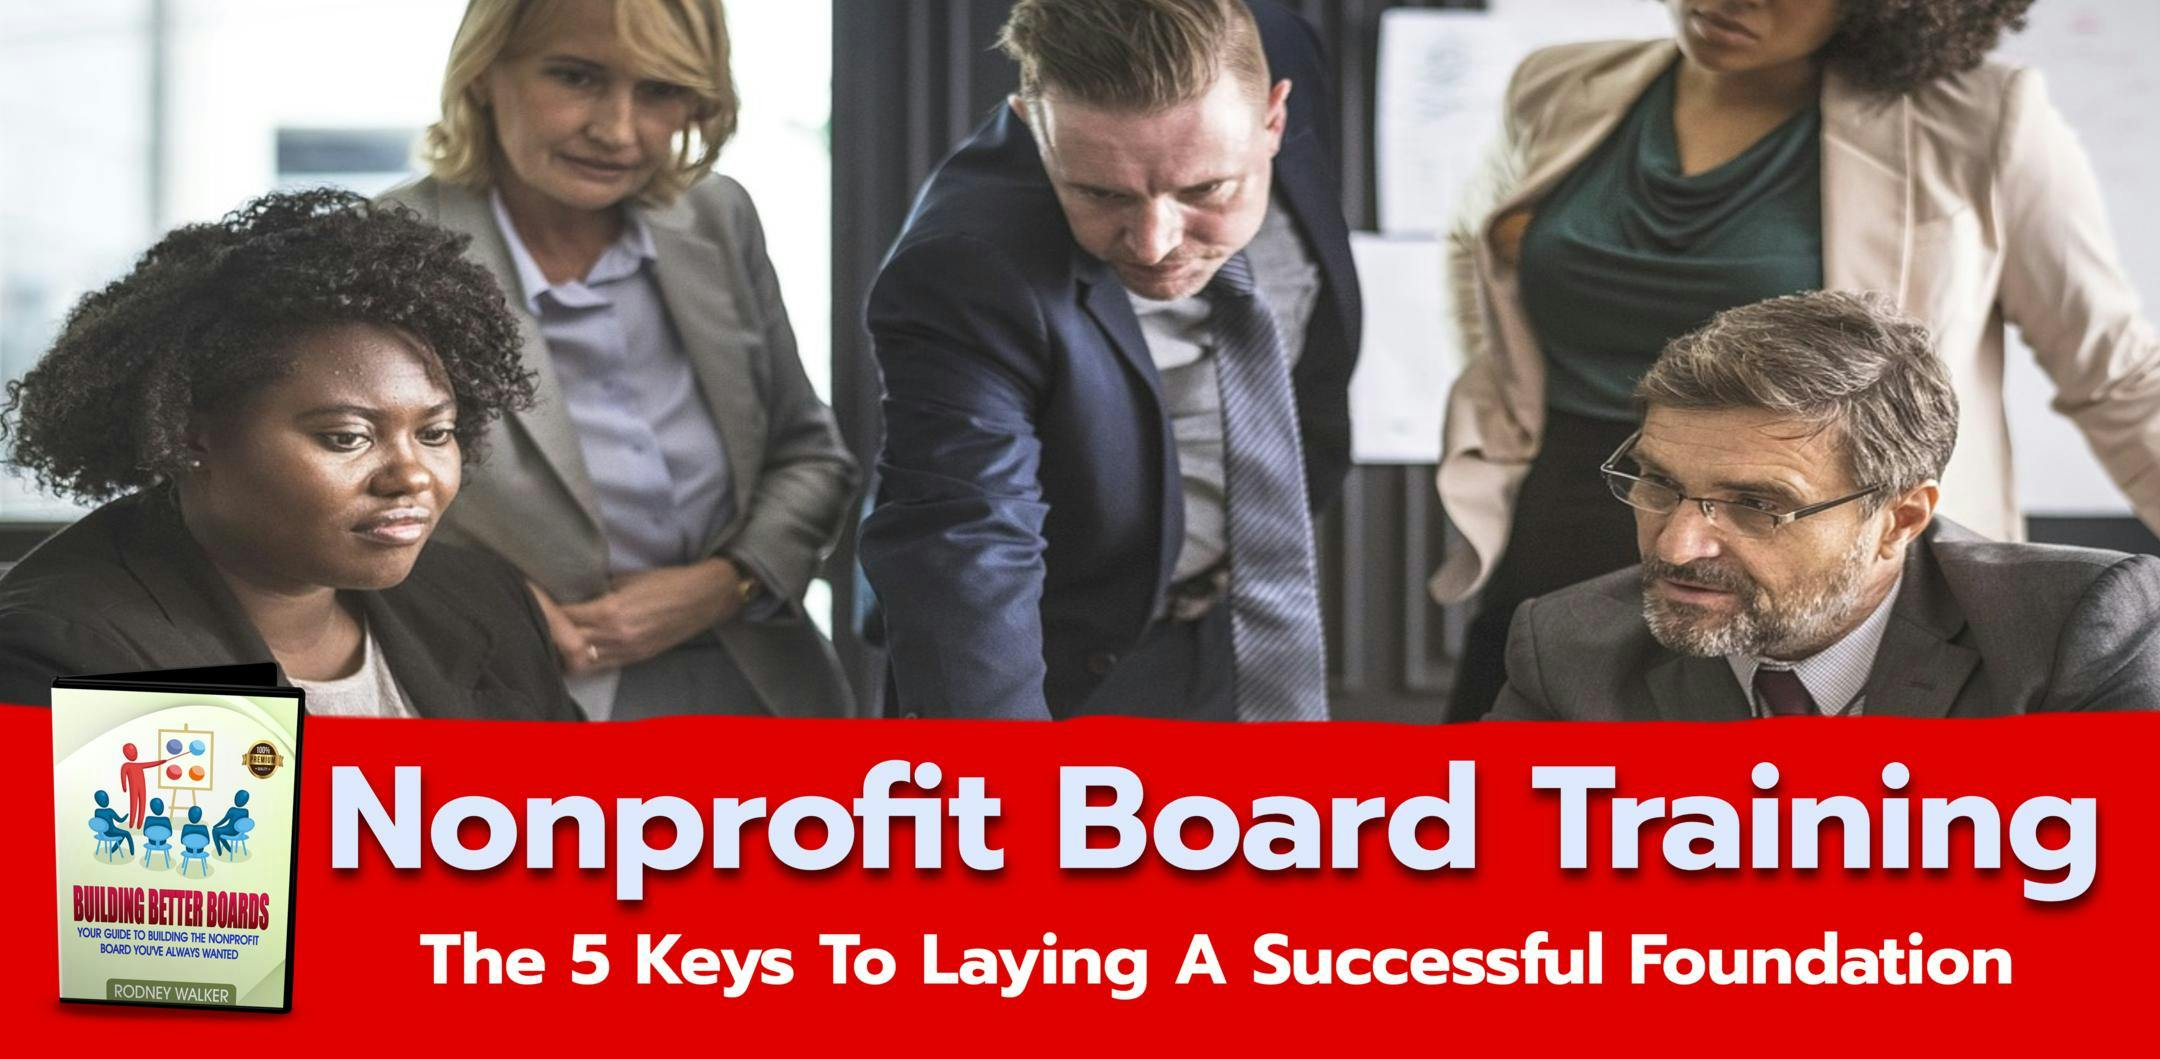 How To Build a Successful Nonprofit Board - Rochester, New York